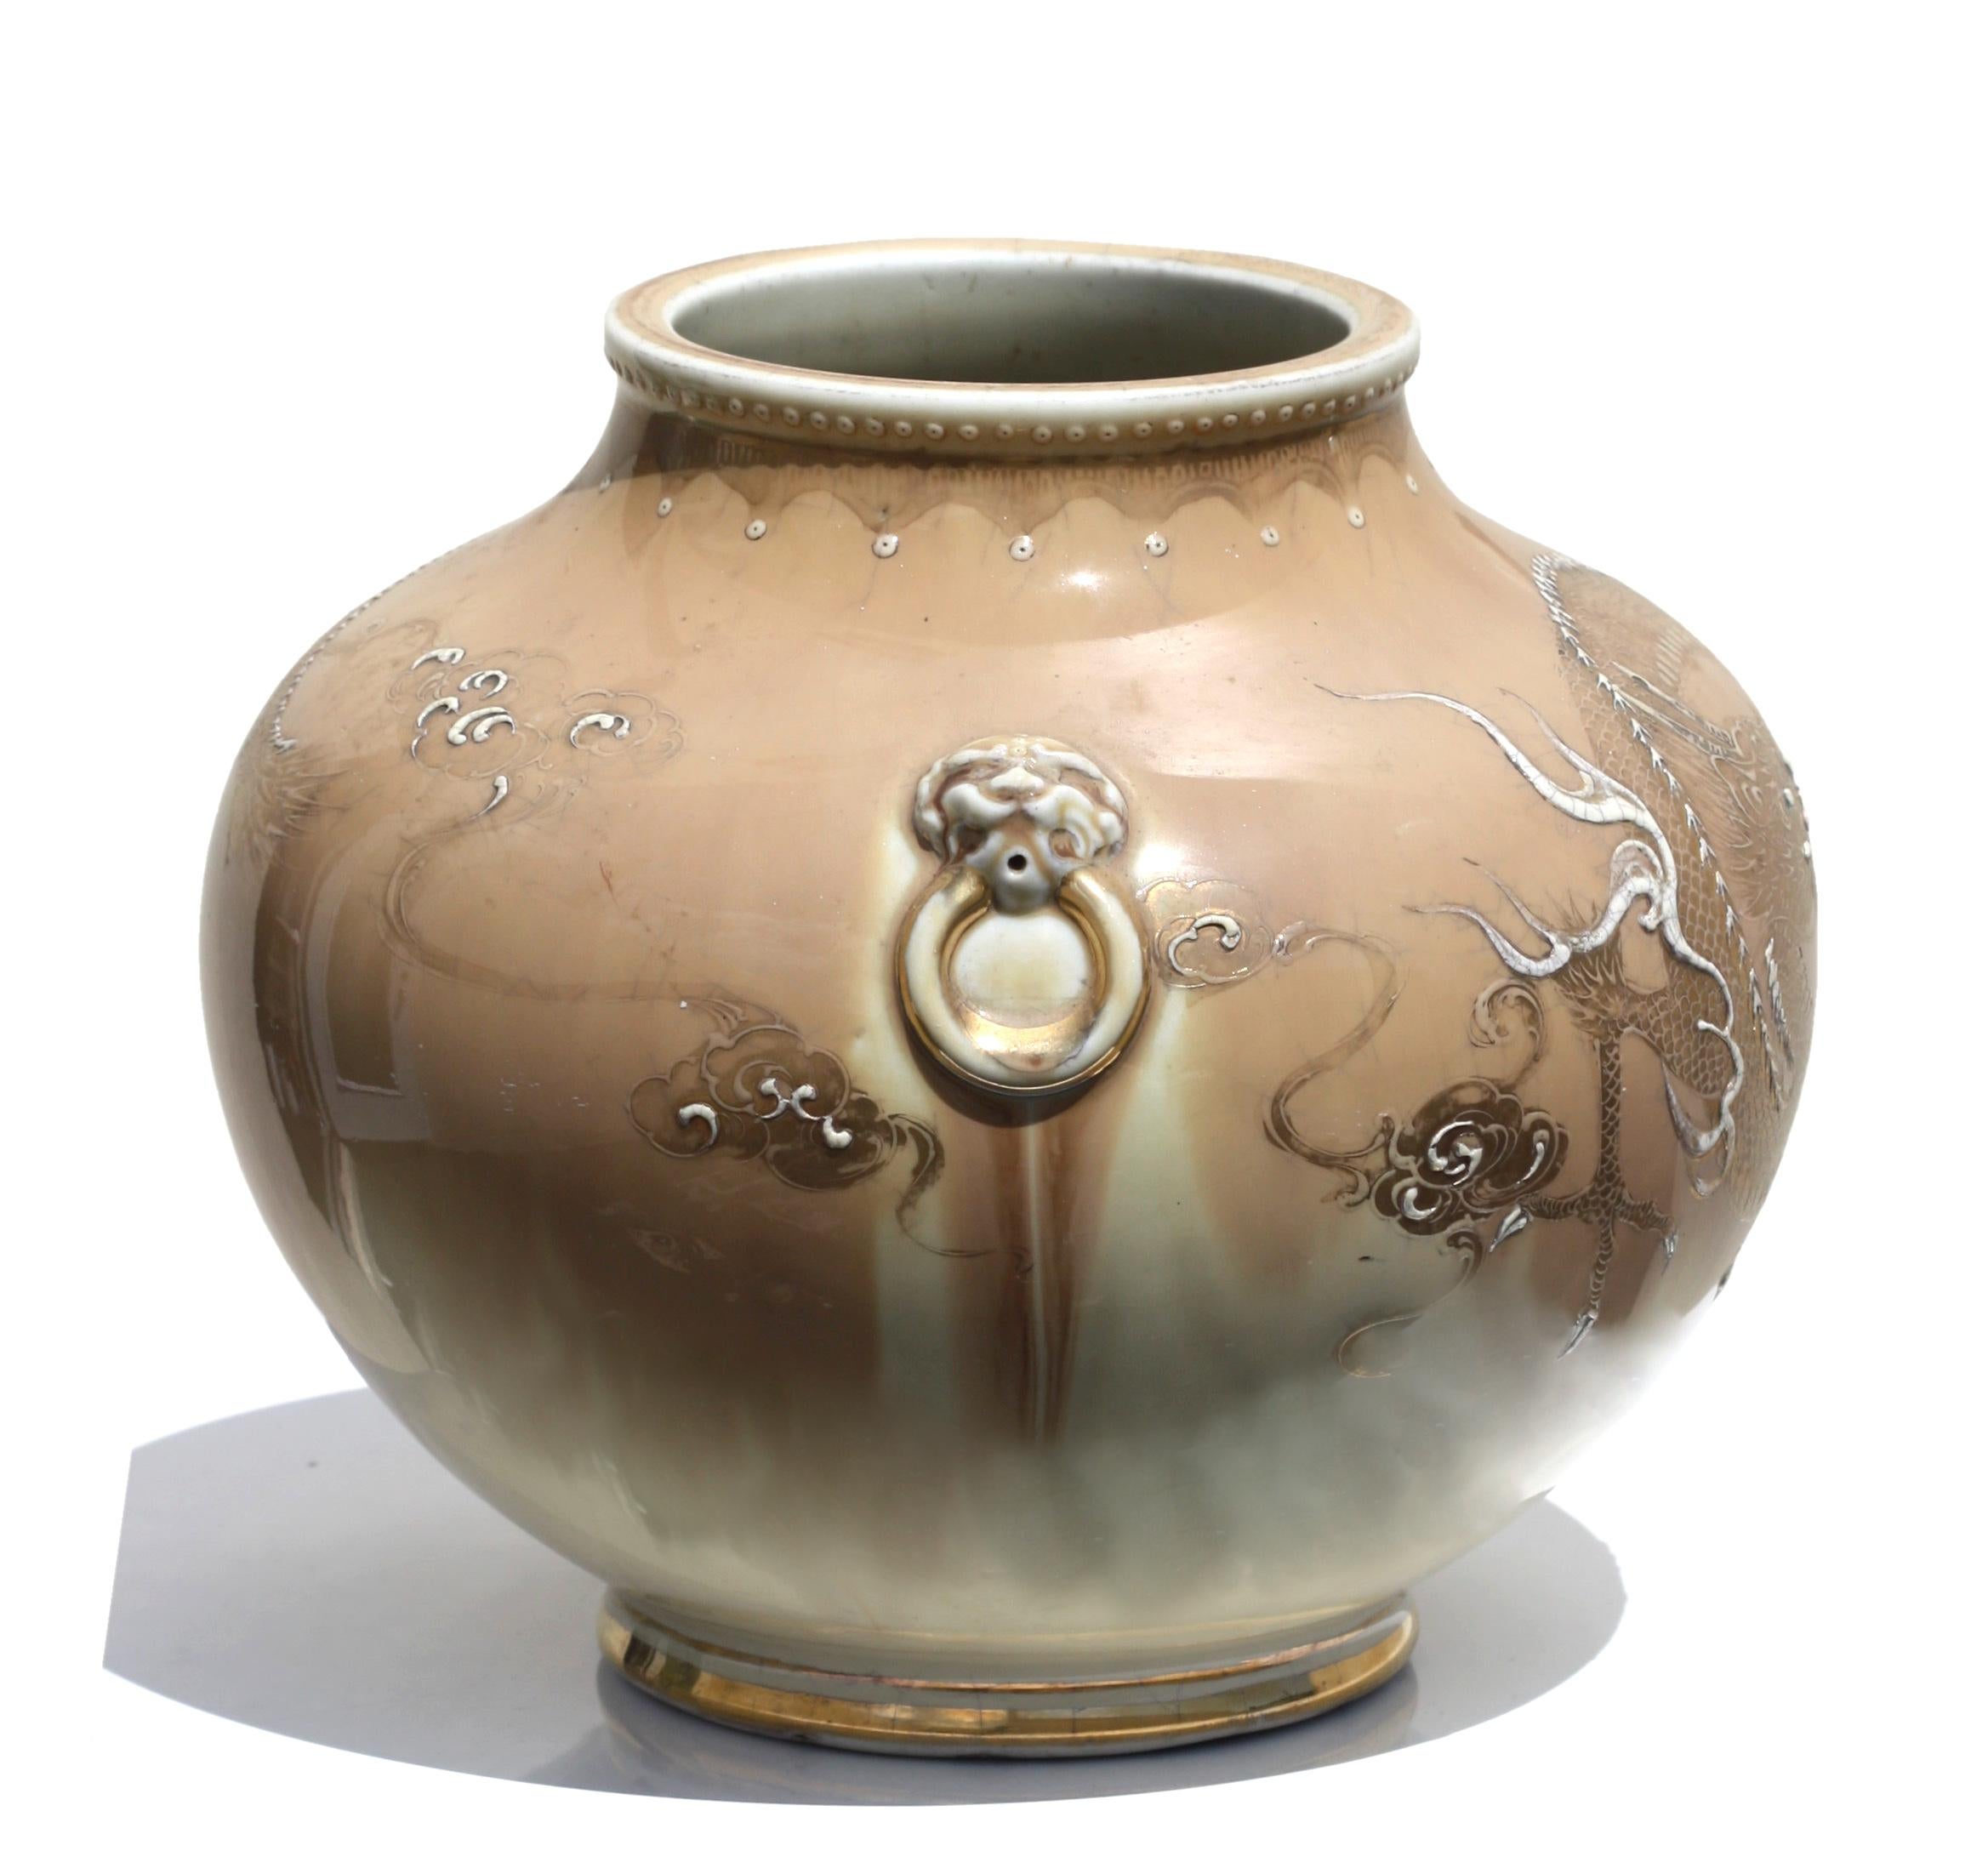 A Japanese Porcelain globular jar with dragon design on a light brown ground, early 20th century, 10 by 8 in. (25.4 x 20.32 cm.).